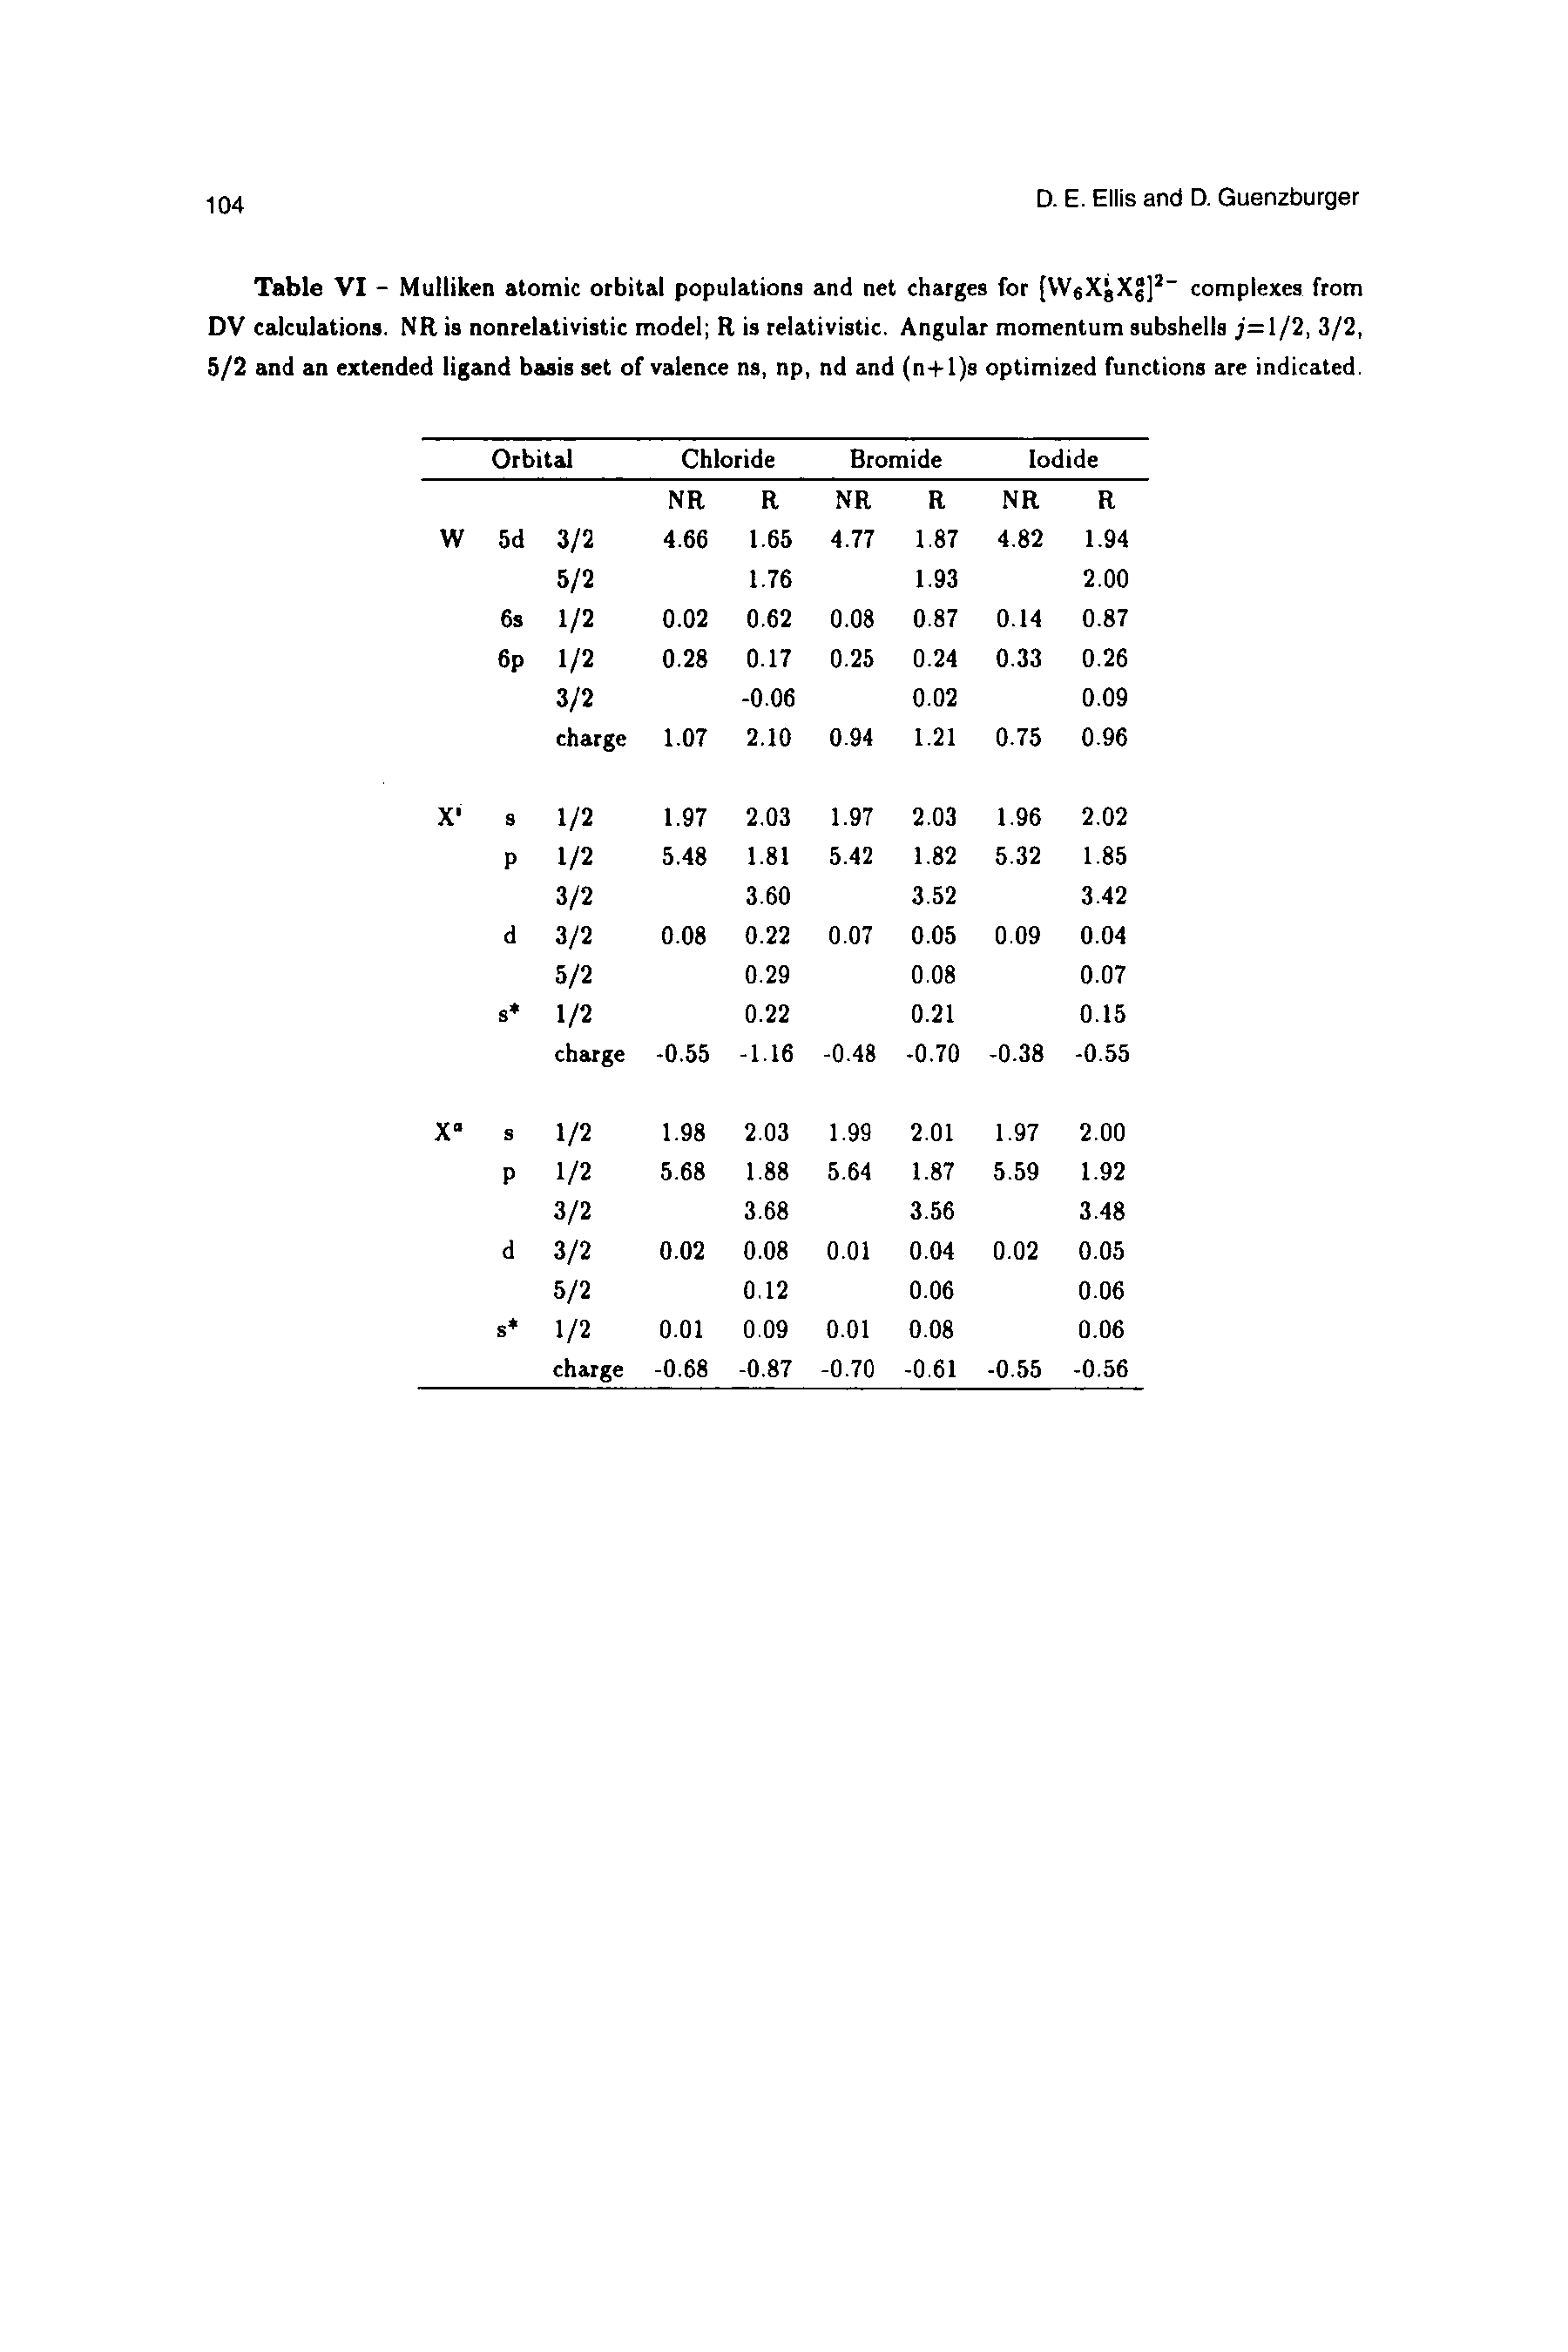 Table VI - Mulliken atomic orbital populations and net charges for [VV XgXg]2- complexes from DV calculations. NR is nonrelativistic model R is relativistic. Angular momentum subshells j= 1/2, 3/2, 5/2 and an extended ligand basis set of valence ns, np, nd and (n+l)s optimized functions are indicated.